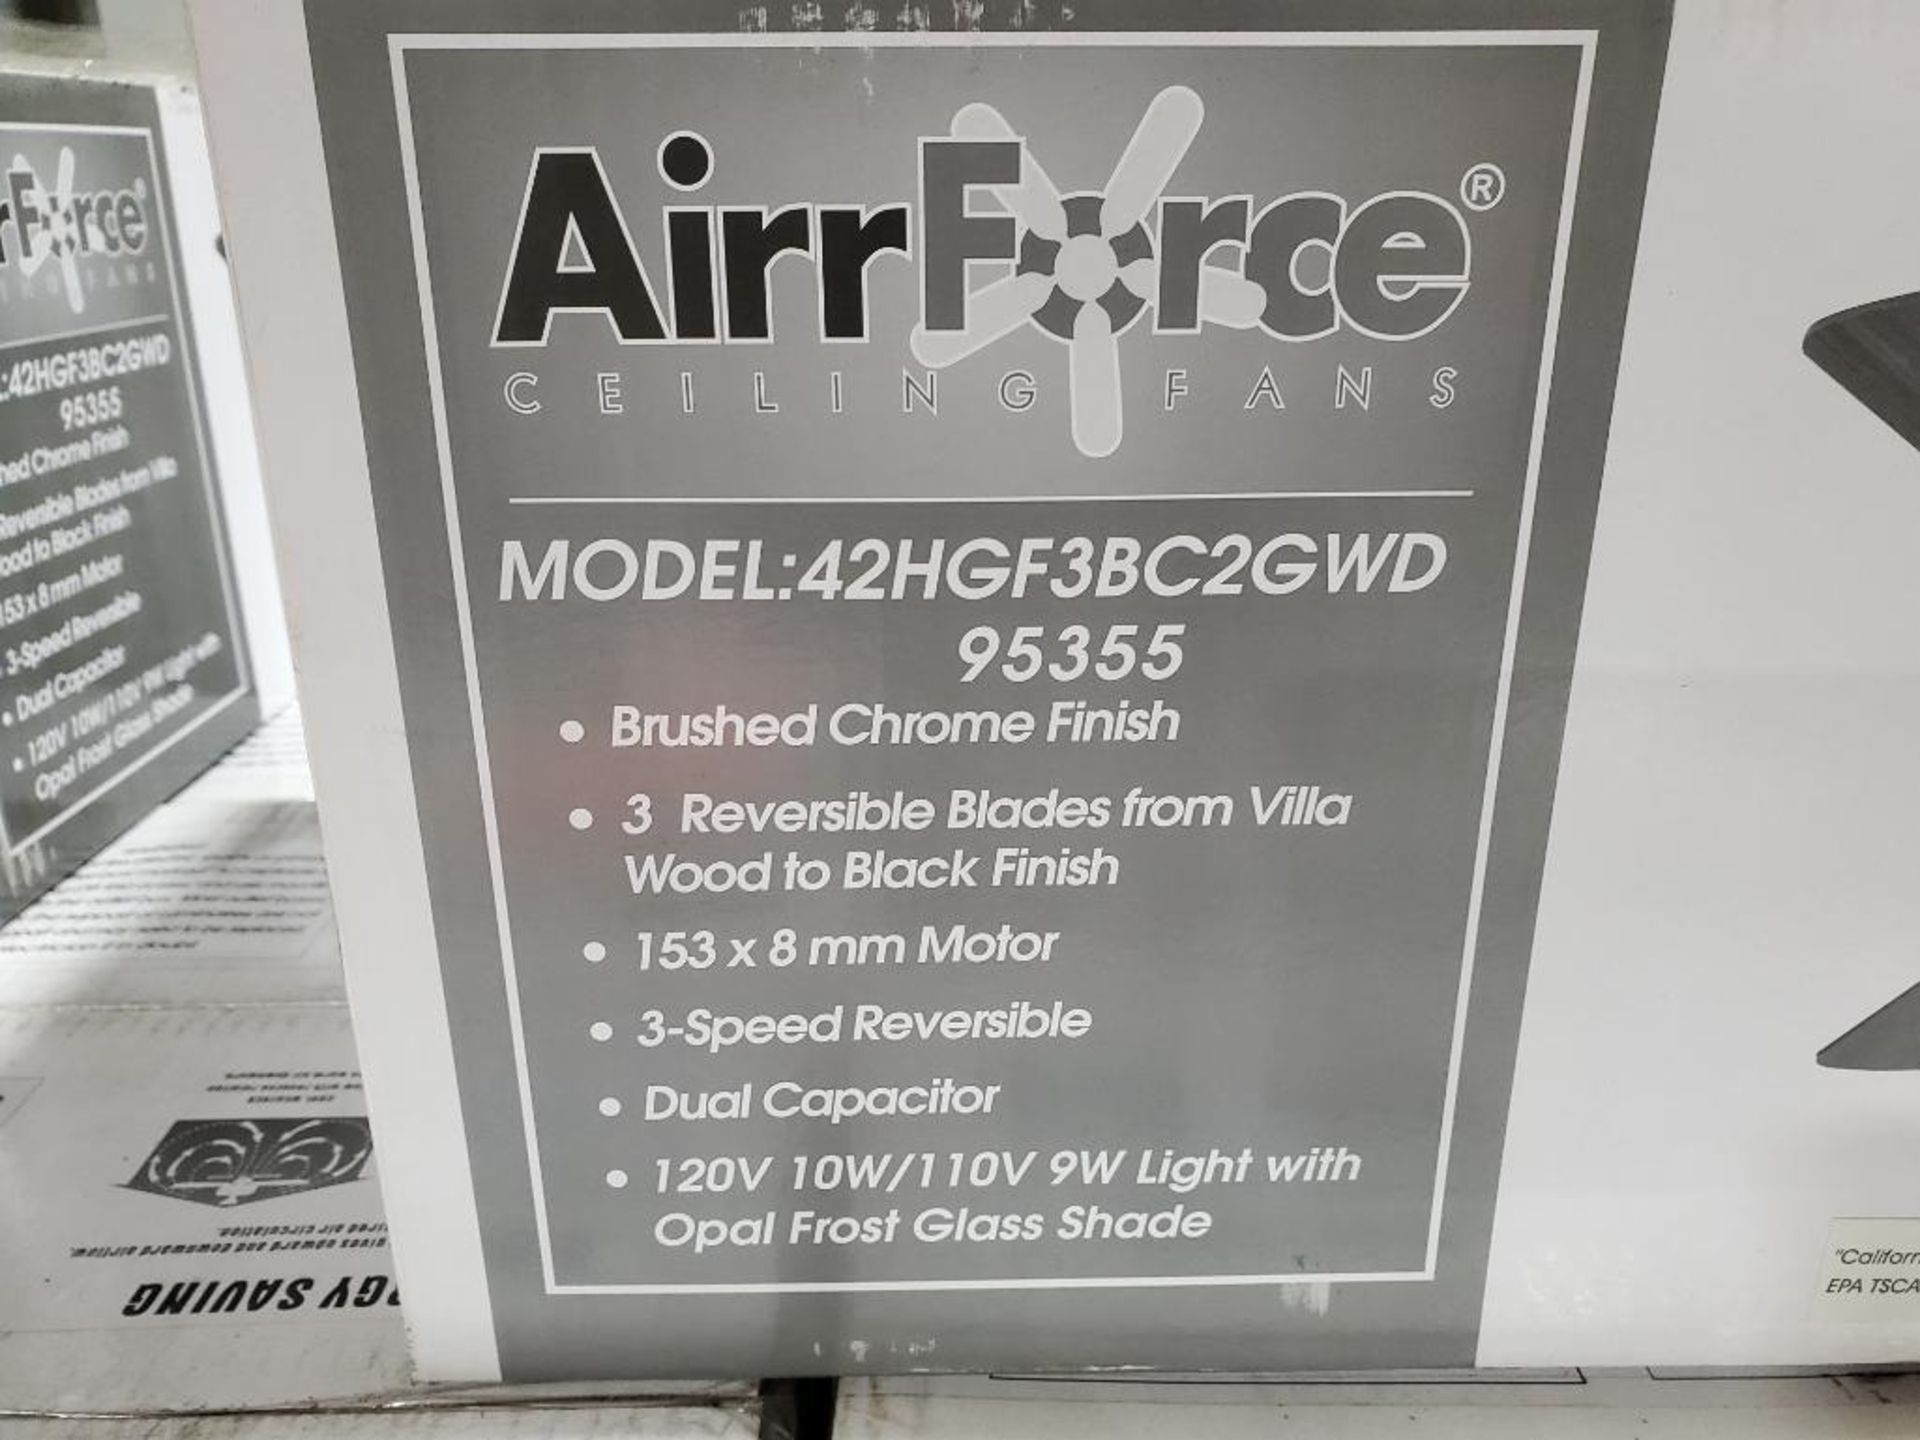 Qty 6 - AirrForce Ceiling Fans 42HGF3BC2GWD, 95355. 42 in ceiling fan. New in box. - Image 3 of 4